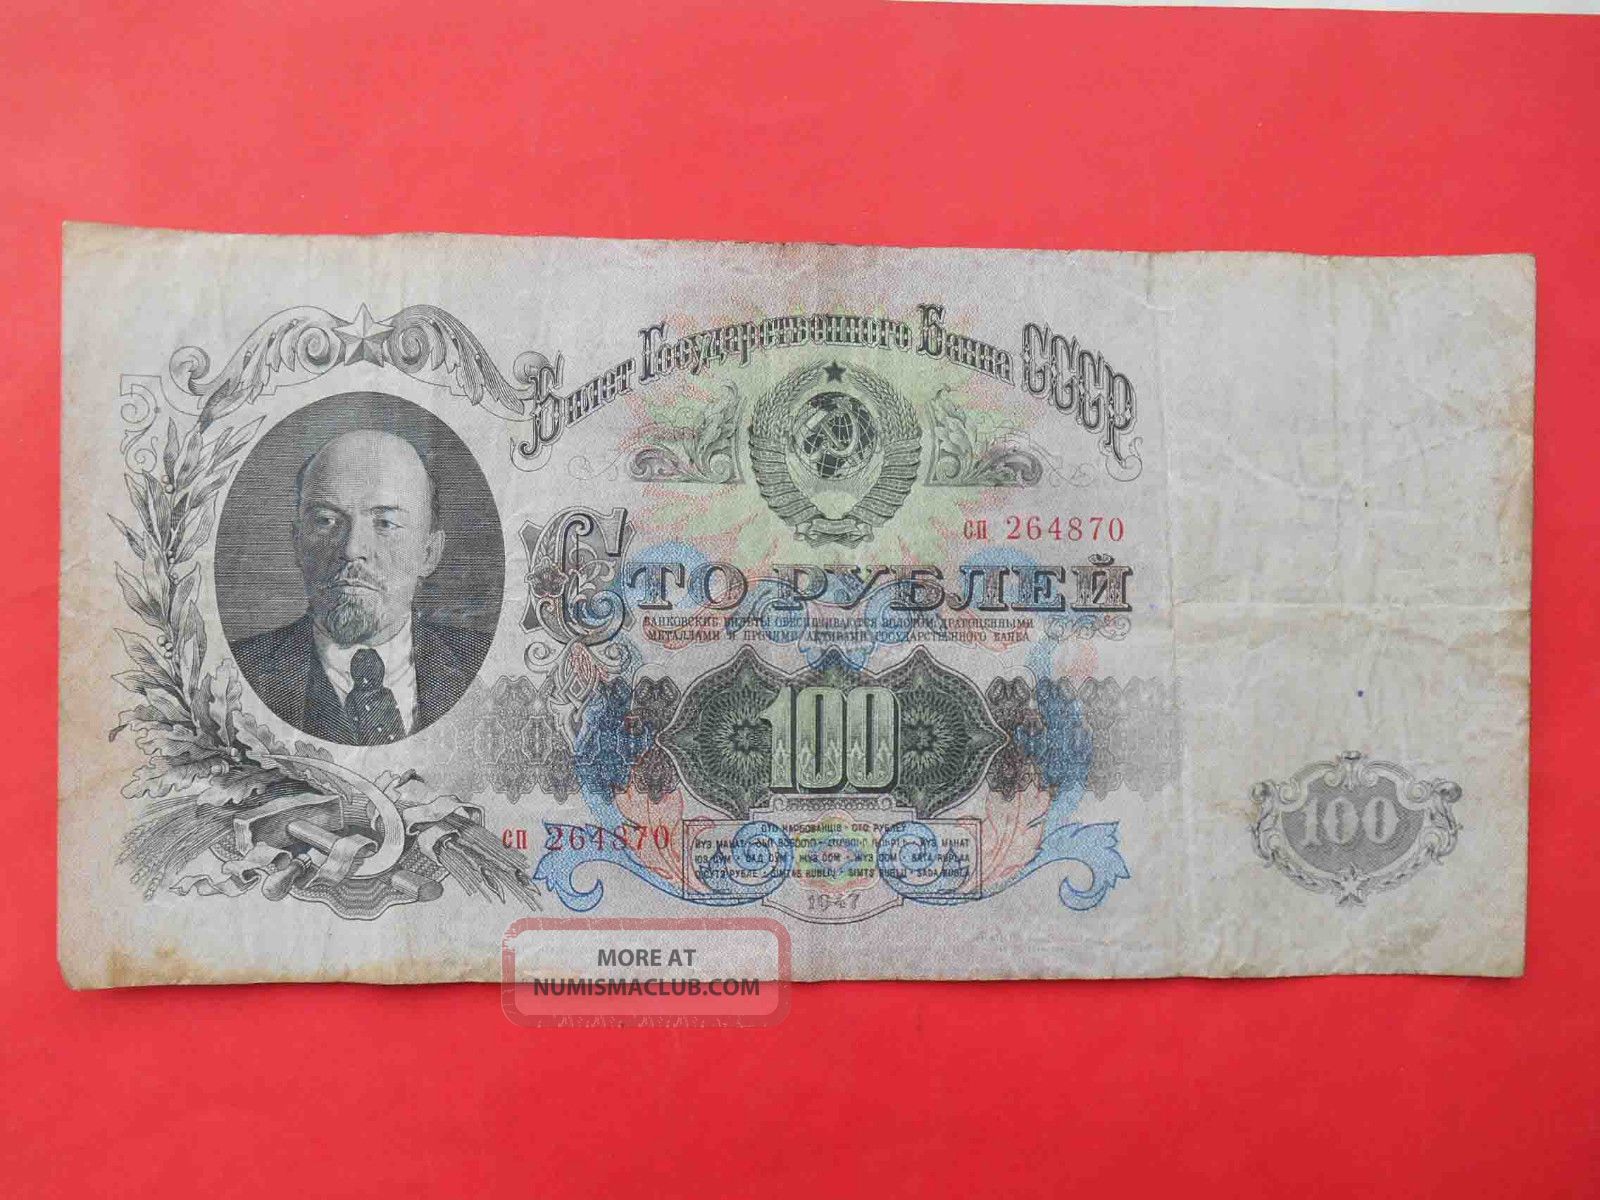 Ussr 1947 100 Rubles With Lenin.  Type 1 (16 Ribbons).  Russian Banknote сп 264870 Europe photo